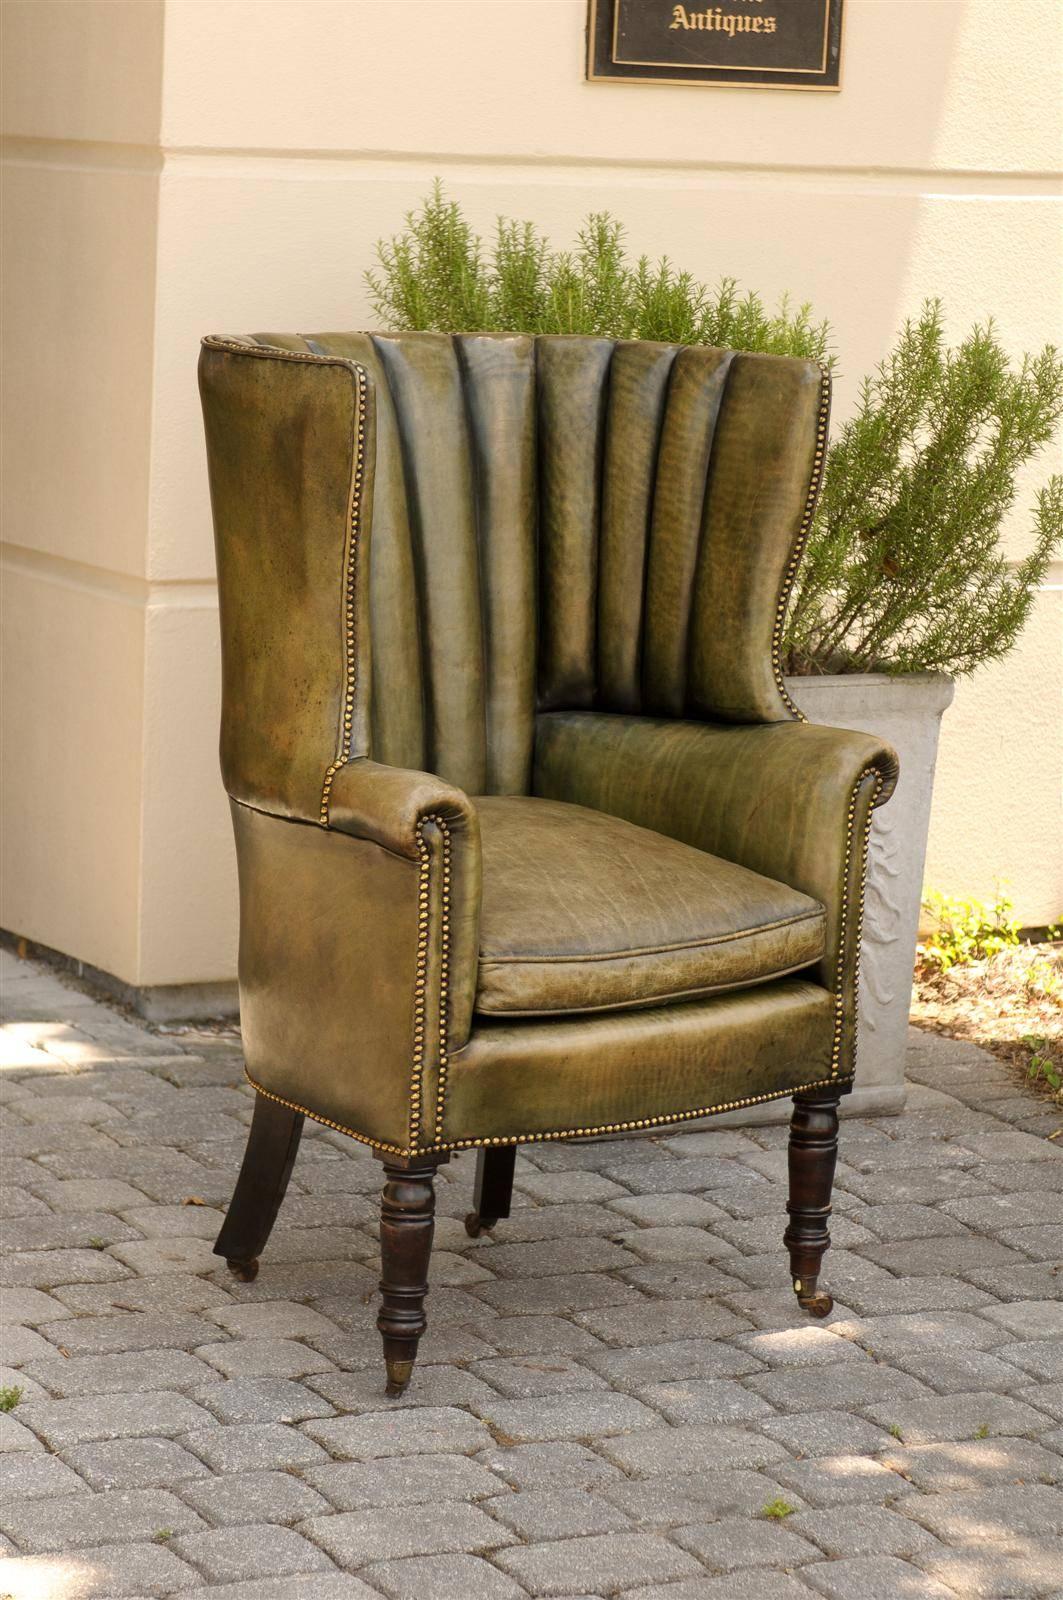 This English barrel wingback chair from the mid to late 19th century features an exquisite green toned leather upholstery with brass nails. The wing back offers privacy to the sitter, who can read a book quietly in front of a fireplace. The scrolled